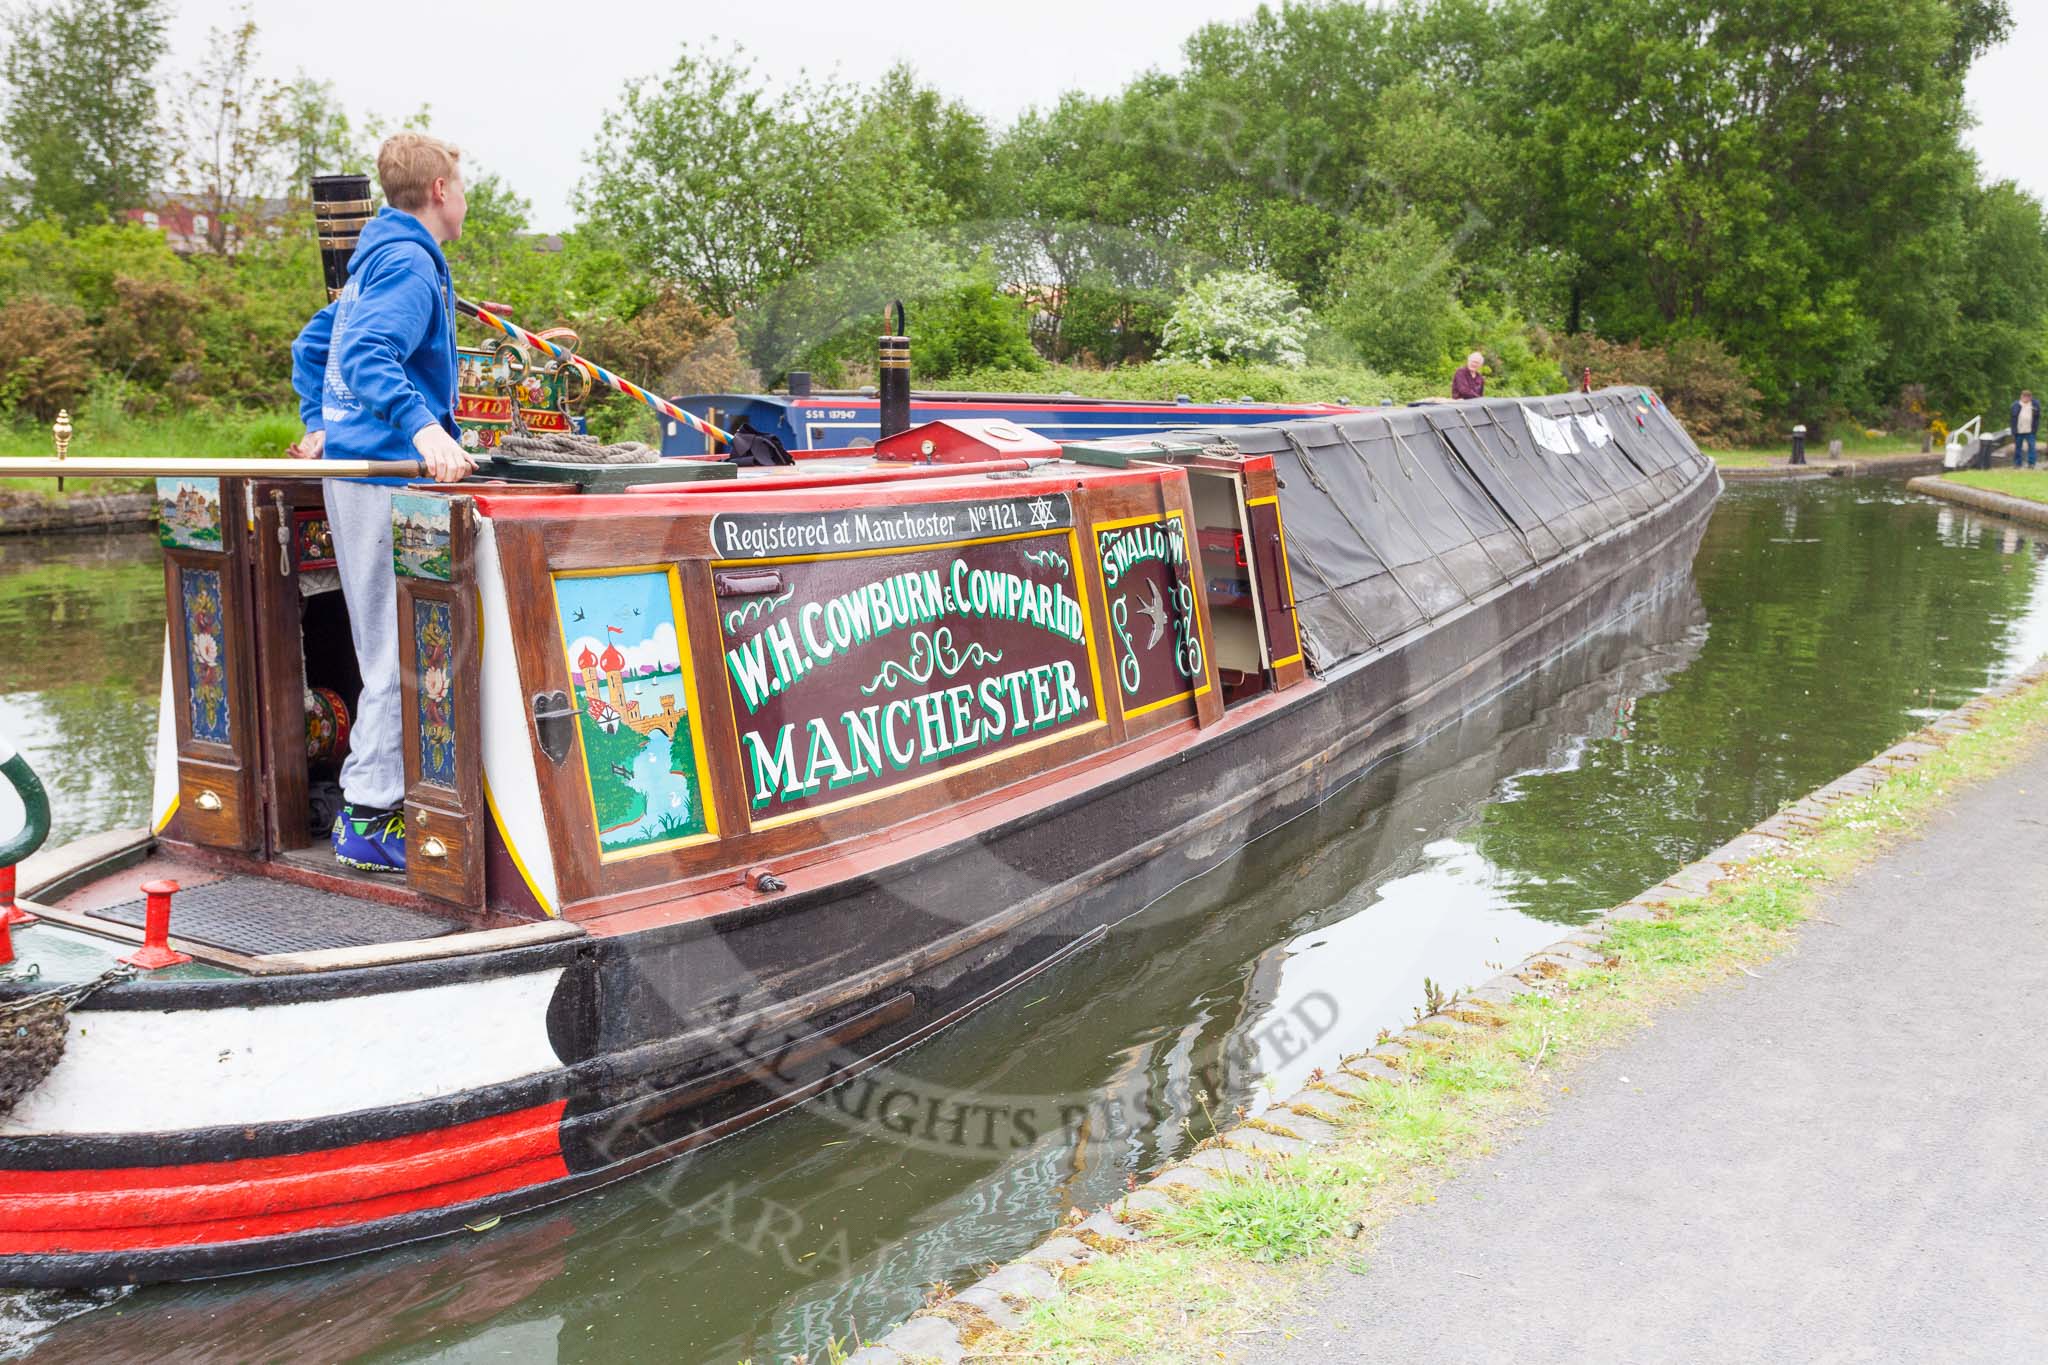 BCN 24h Marathon Challenge 2015: Narrow boat "Swallow" at the Smethwick Locks. For a virtual tour of Swallow see j.mp/bclm-swallow.
Birmingham Canal Navigations,



on 23 May 2015 at 10:31, image #61